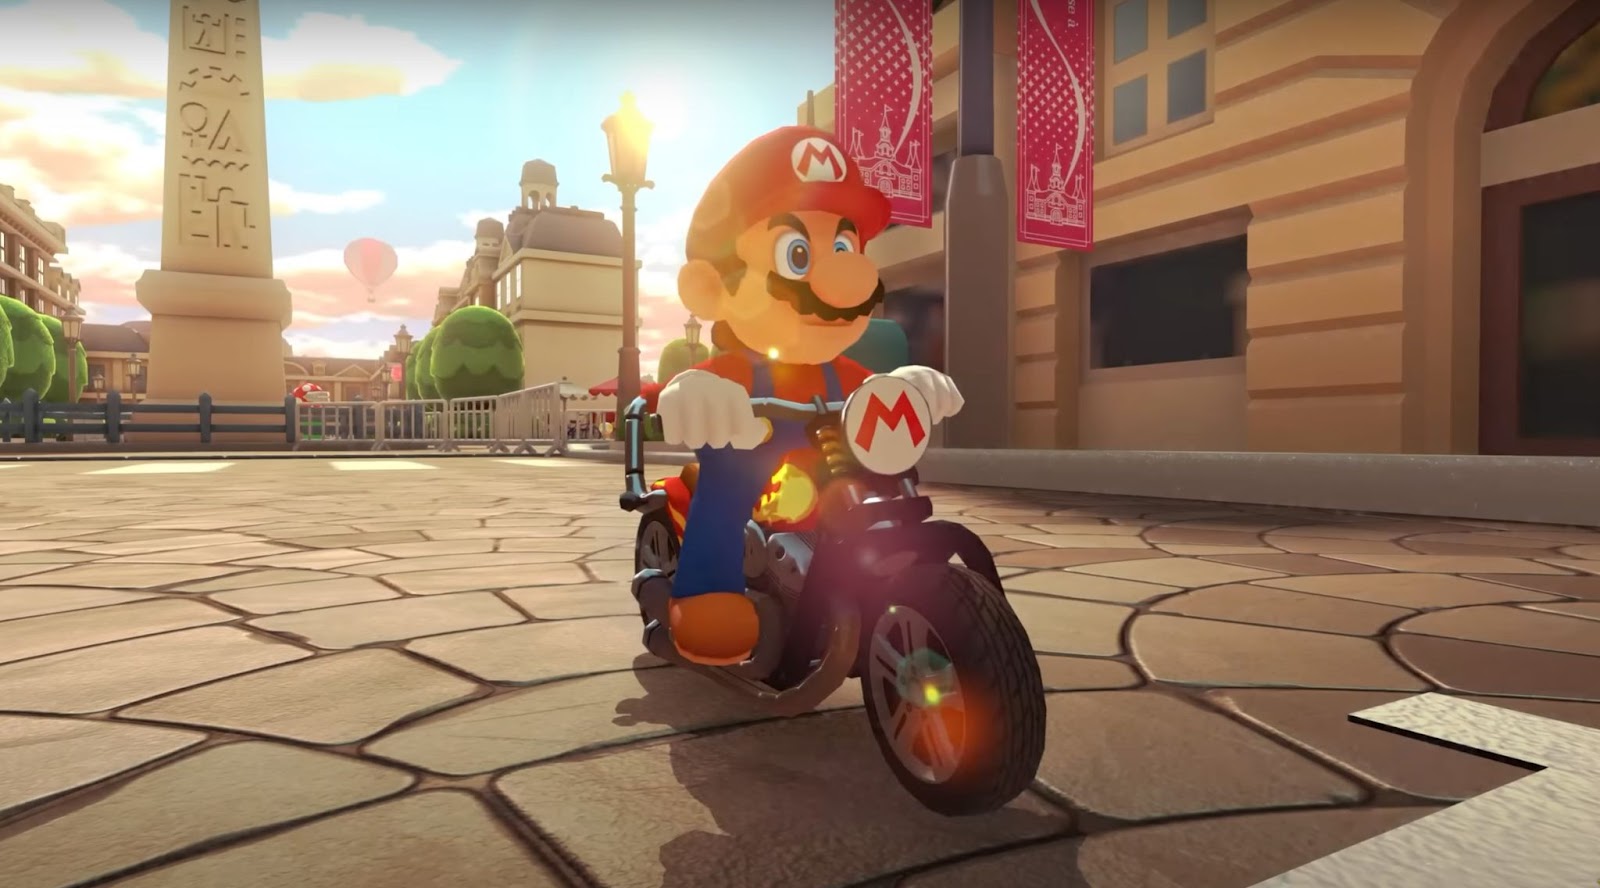 Where Can You Find 1 Star In Mario Kart 8 Deluxe?